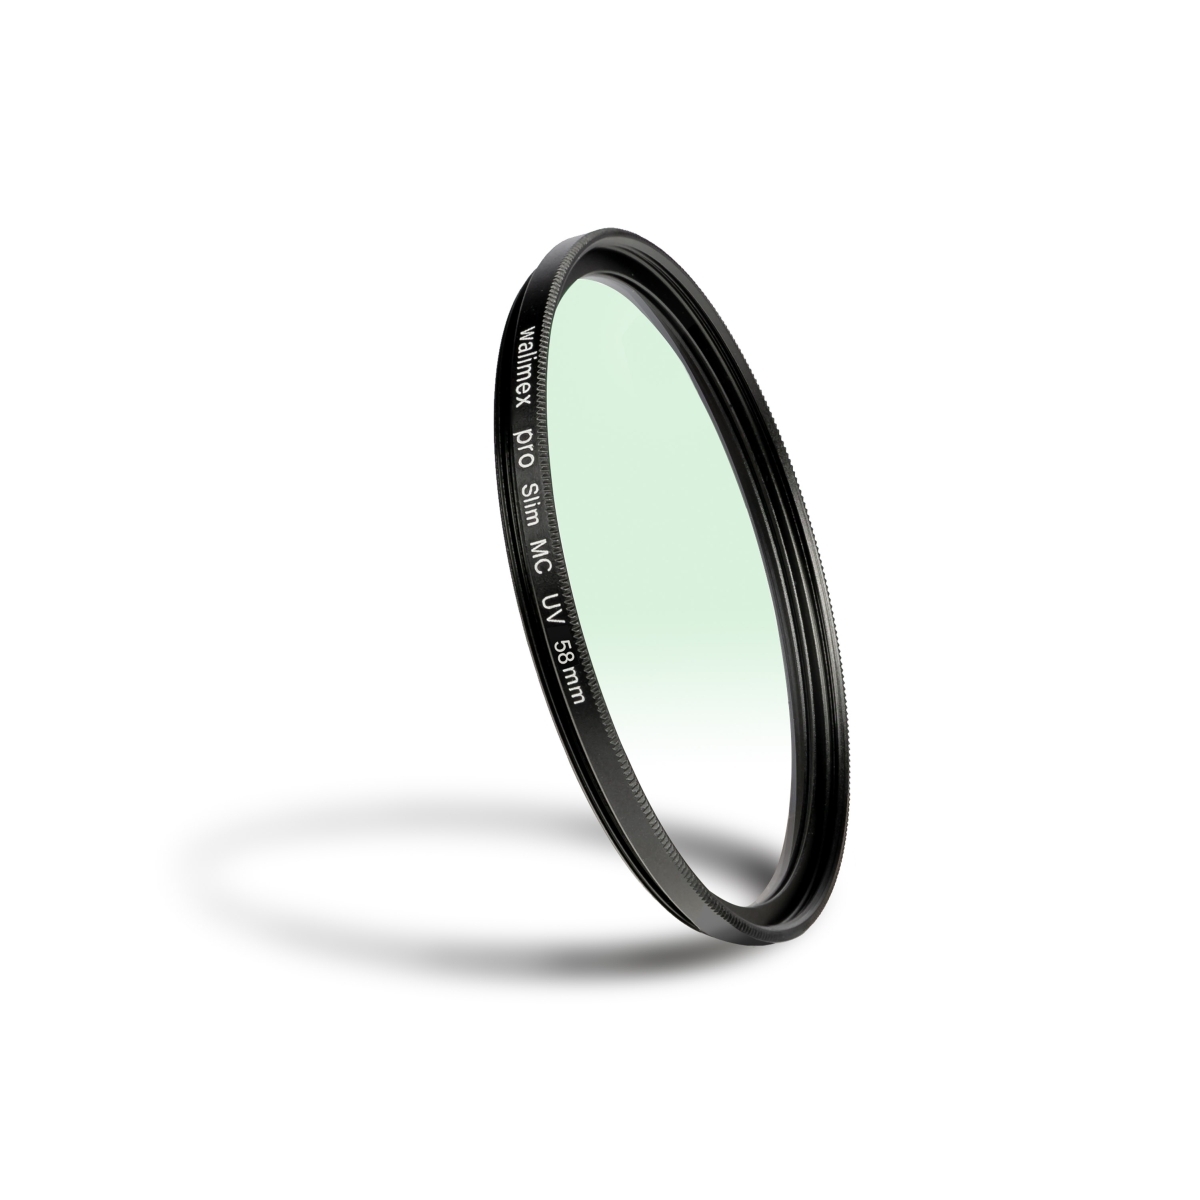 walimex pro 77mm ND8 Coated Filter for Camera